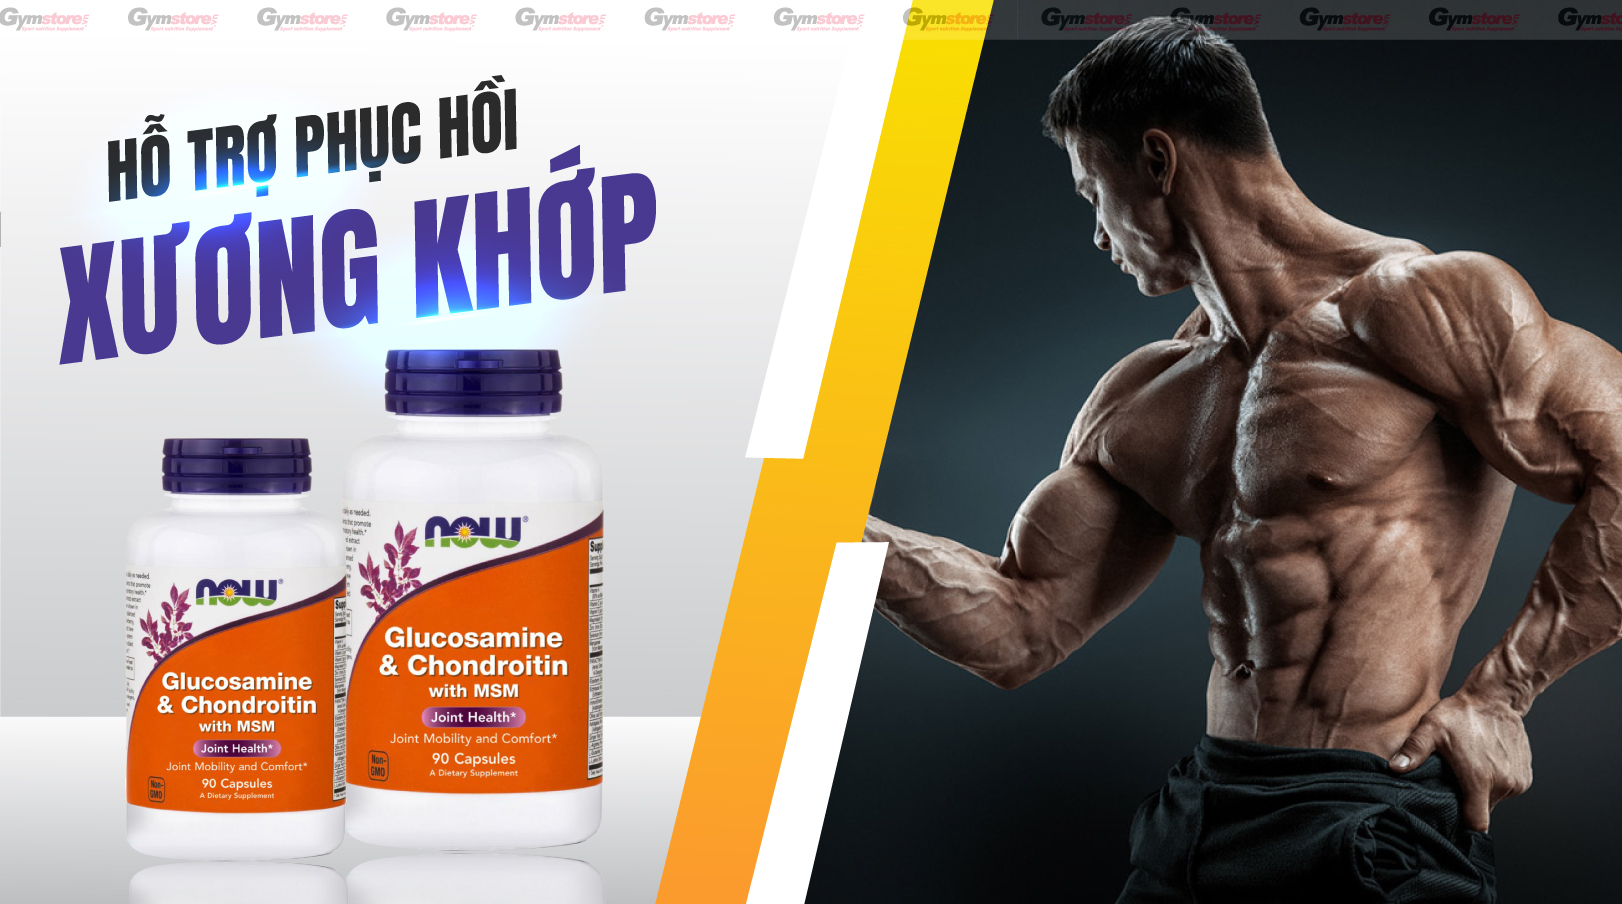 NOW-Glucosamine-Chondroitin-with-MSM-ho-tro-xuong-khop-gymstore